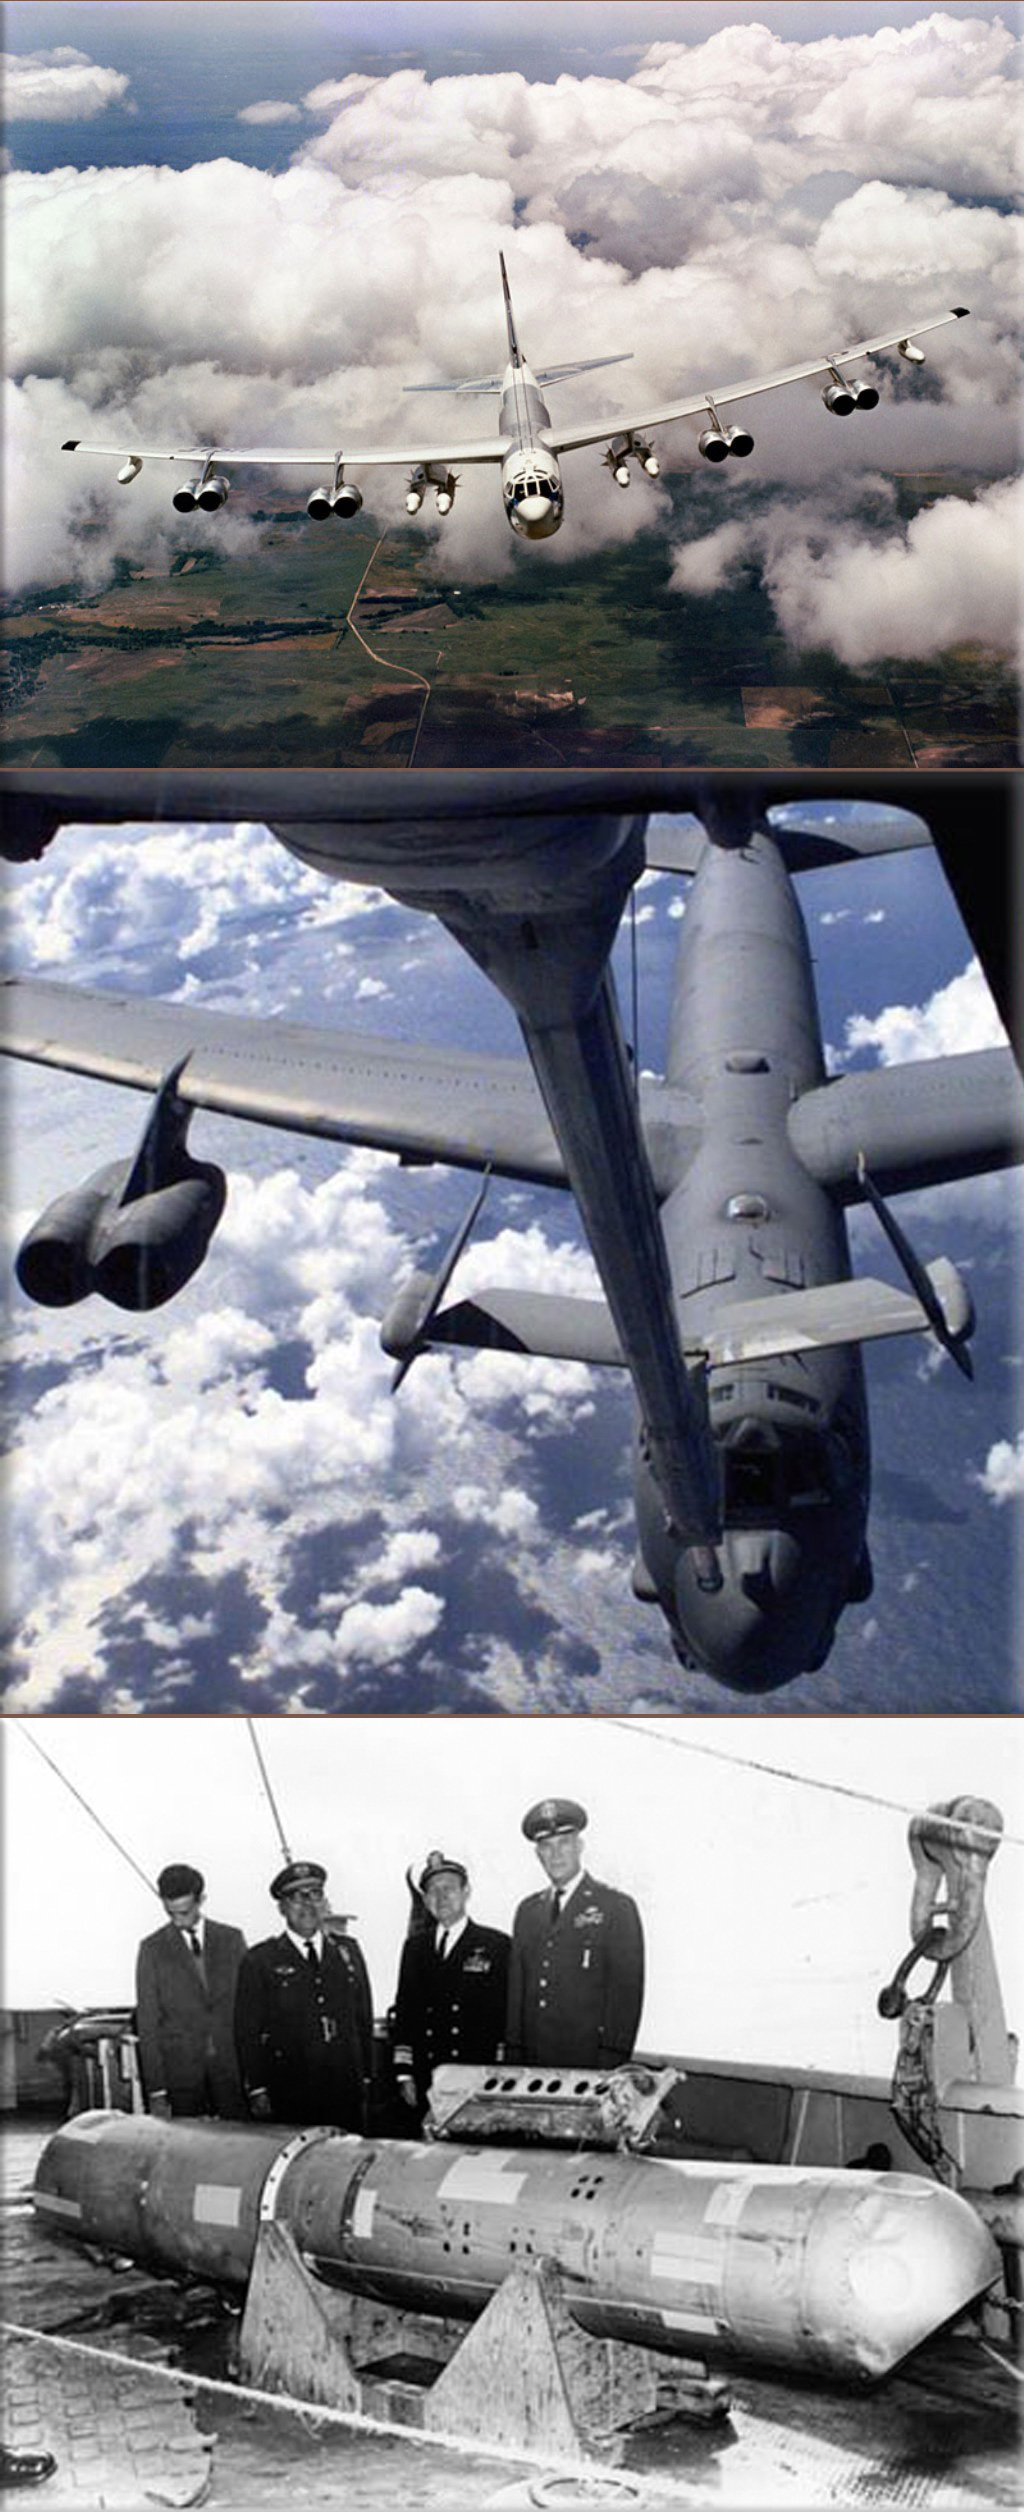 The 1966 Palomares B-52 crash or Palomares incident occurred on January 17, 1966, when a B-52G bomber of the USAF Strategic Air Command collided with a KC-135 tanker during mid-air refuelling at 31,000 feet (9,450 m) over the Mediterranean Sea, off the coast of Spain